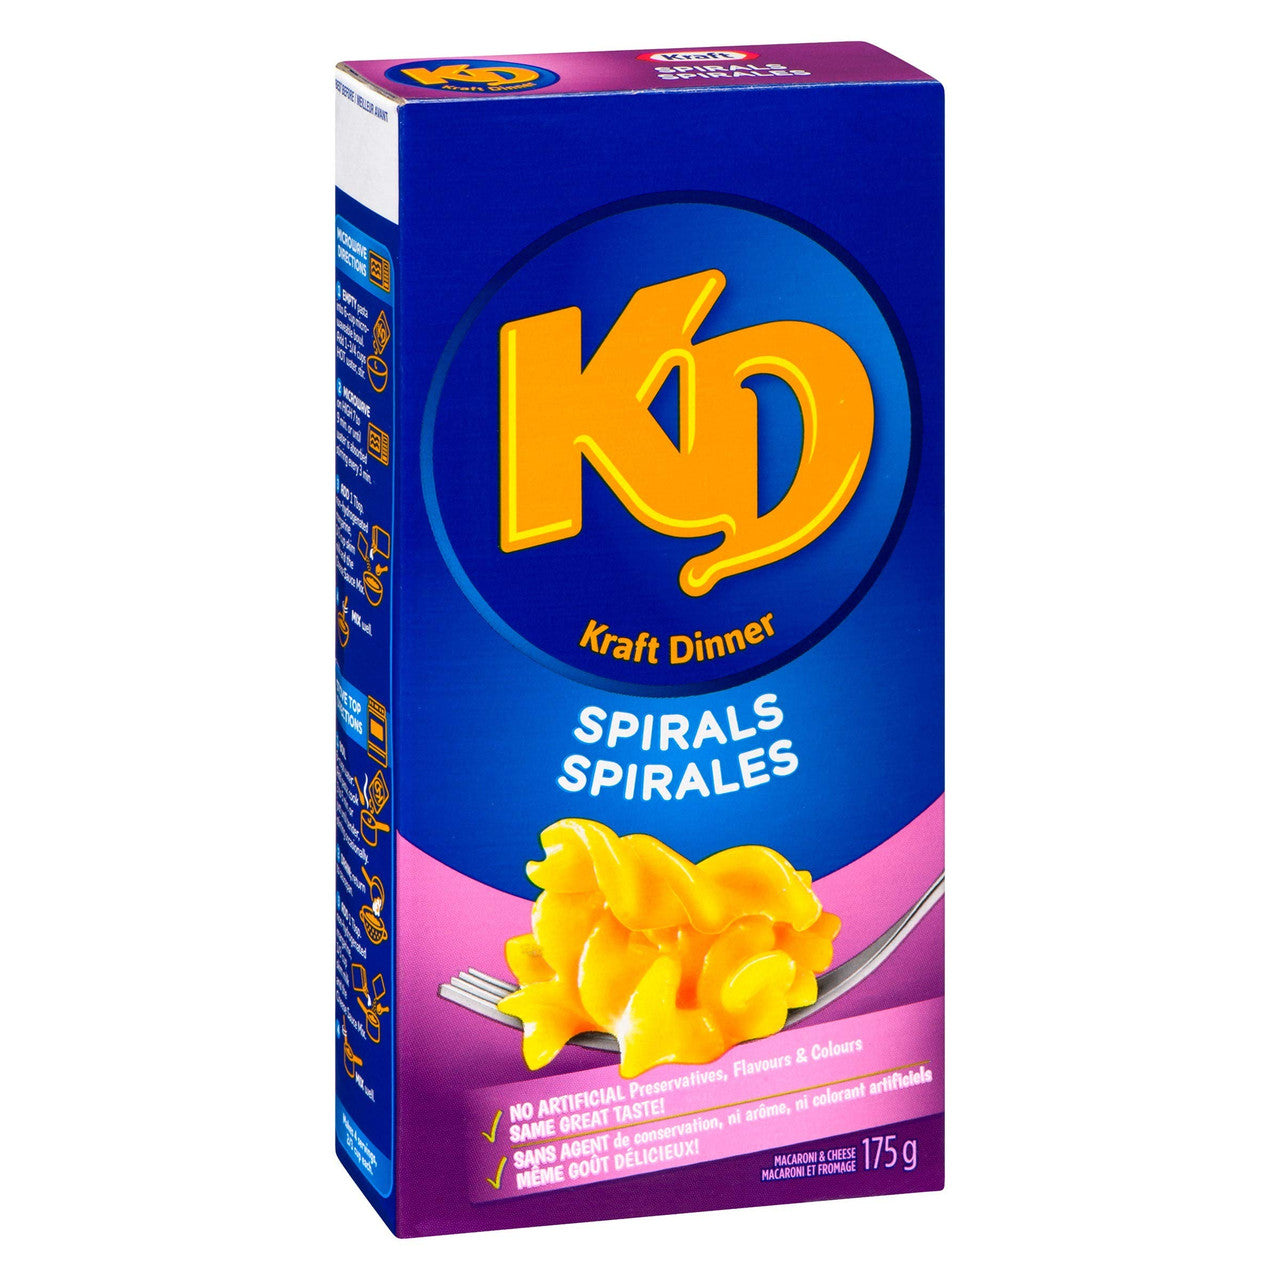 Kraft Dinner Spirals Macaroni & Cheese, 175g/6.2oz. (Pack of 24), {Imported from Canada}